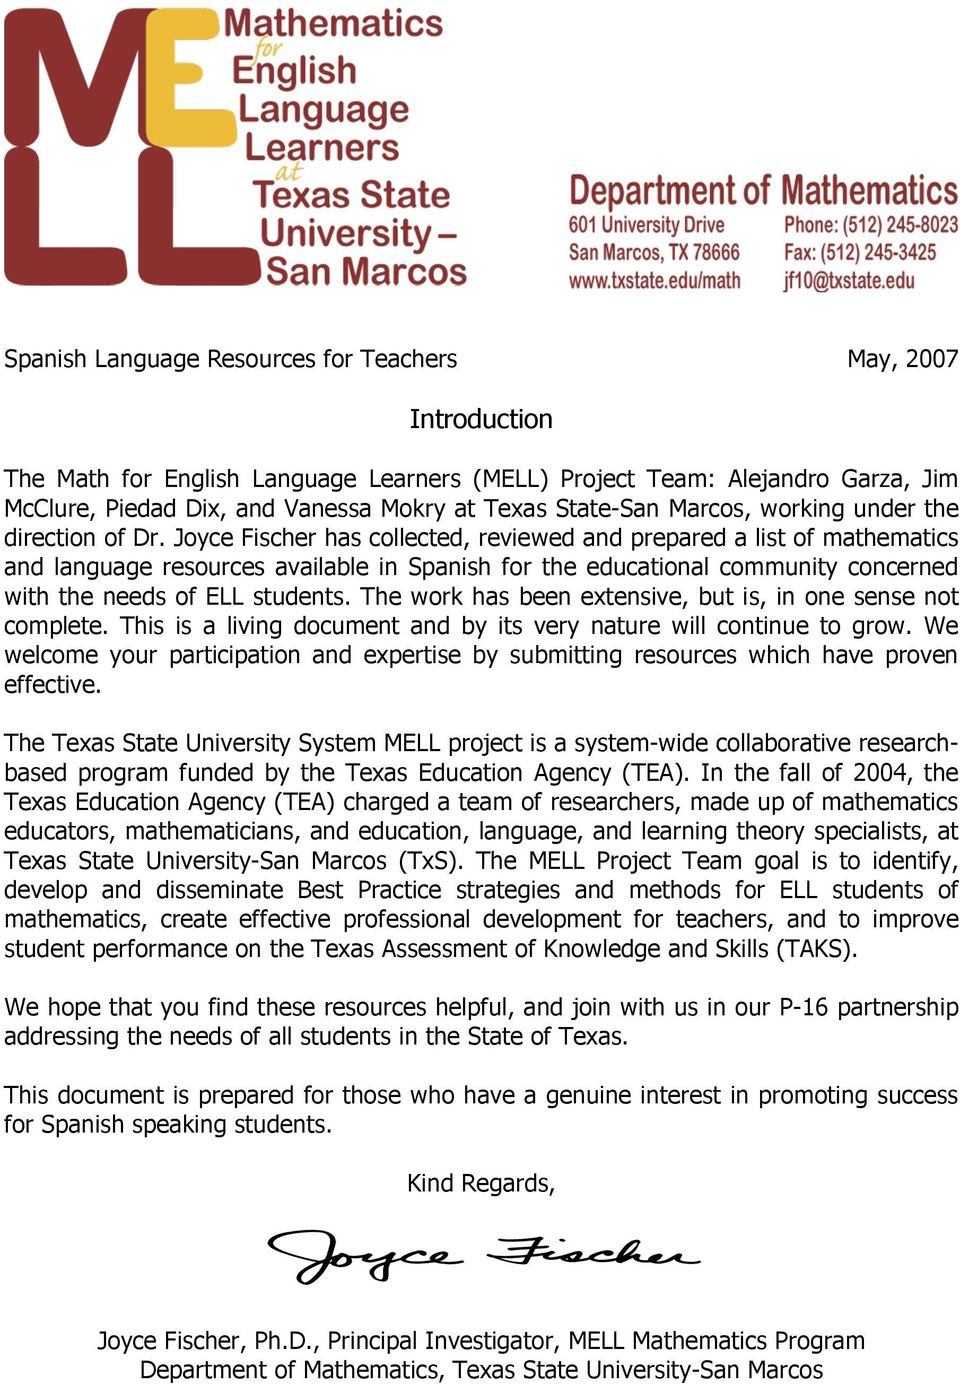 Joyce Fischer has collected, reviewed and prepared a list of mathematics and language resources available in Spanish for the educational community concerned with the needs of ELL students.